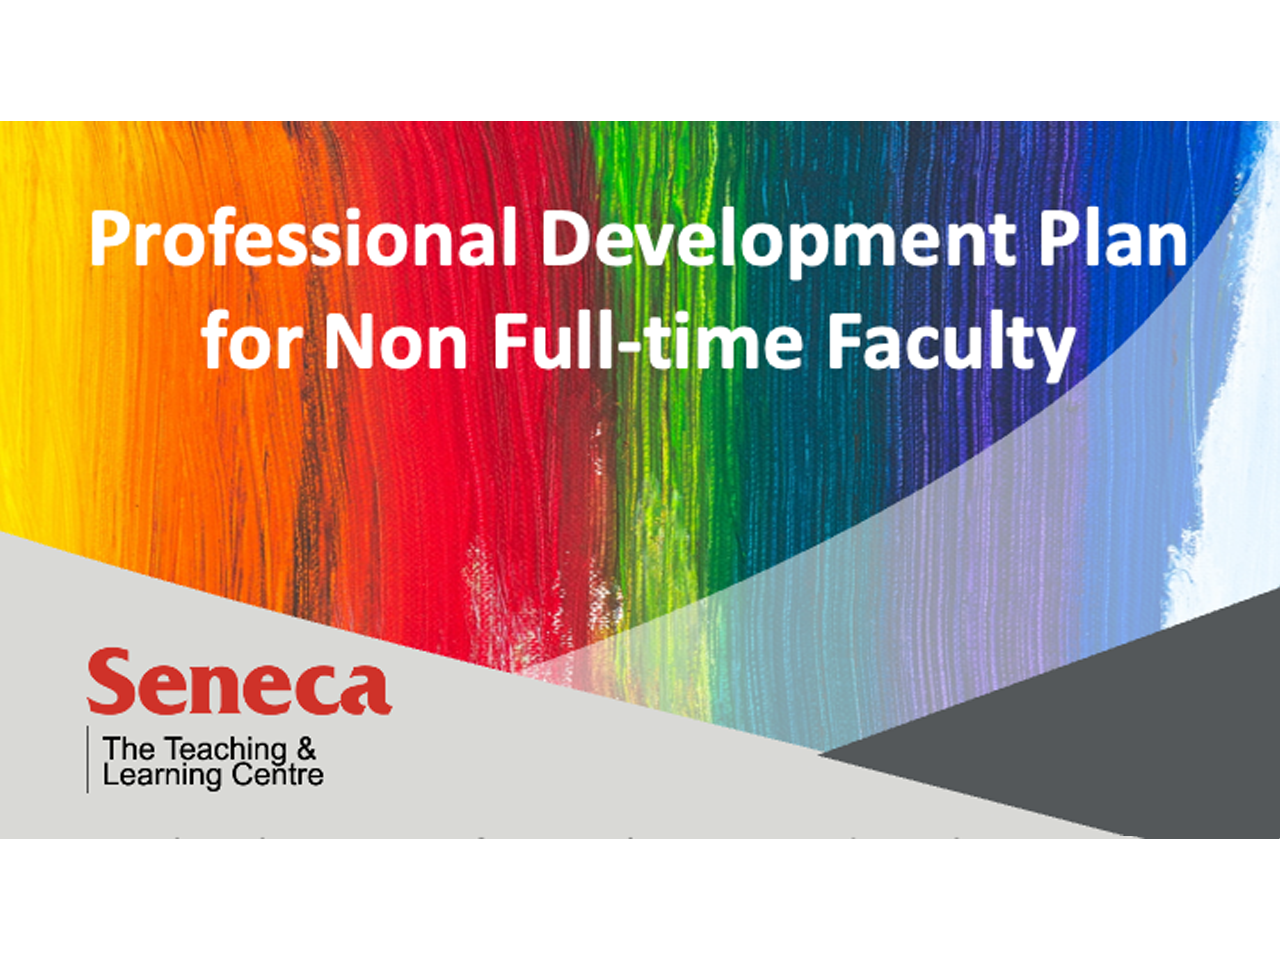 PD Plan for Non Full-time Faculty